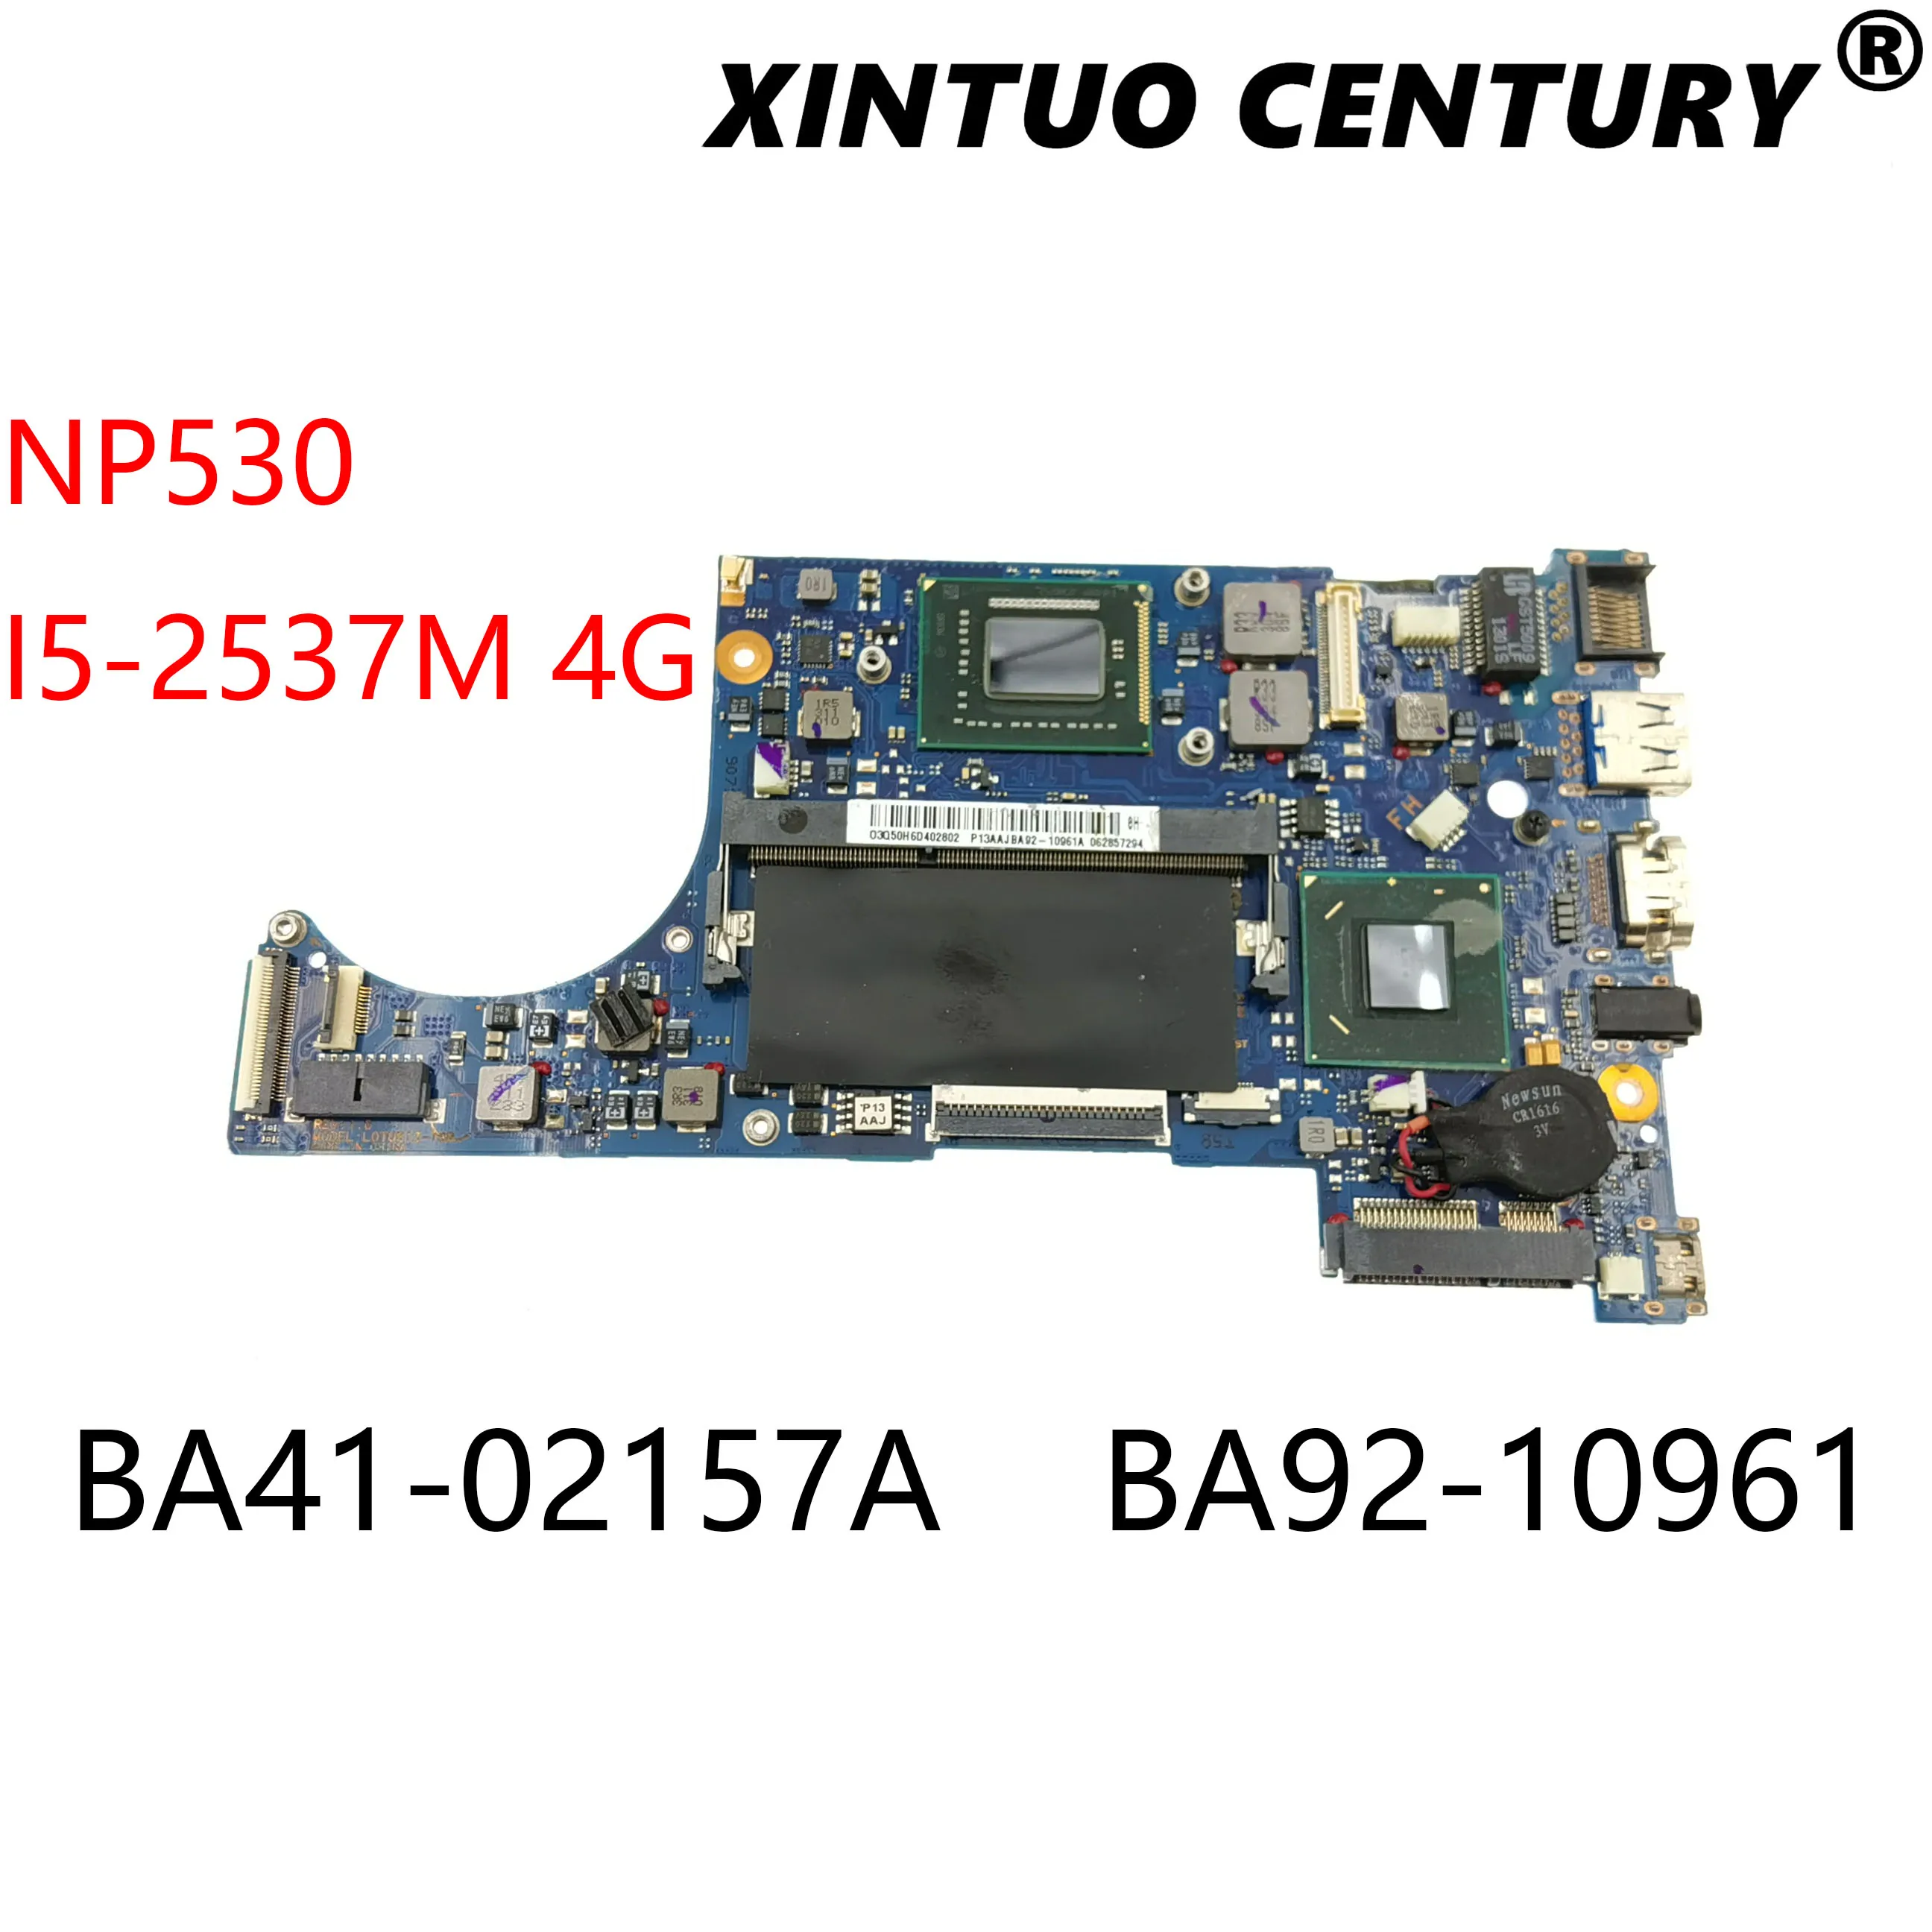 

BA41-02157A BA92-10961 is applicable to NP350 Samsung notebook computer, and I5-2537M 4G SR03W CPU passes the test